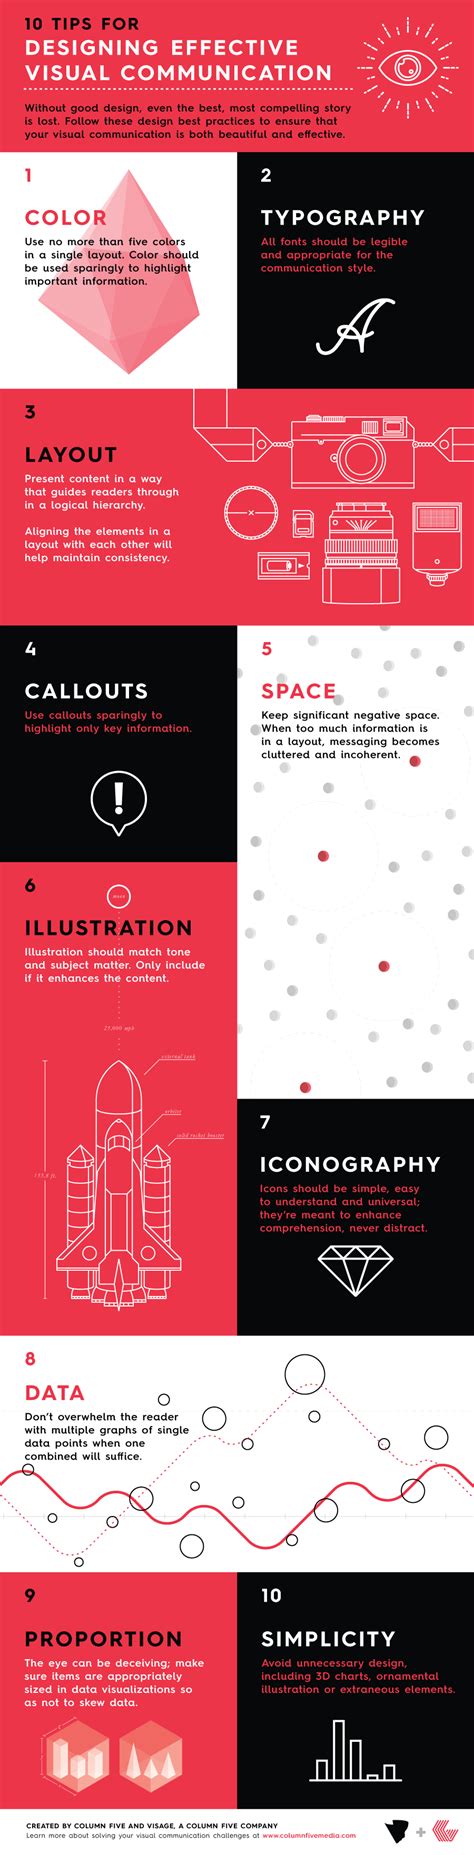 10 Tips For Designing Effective Visual Communication